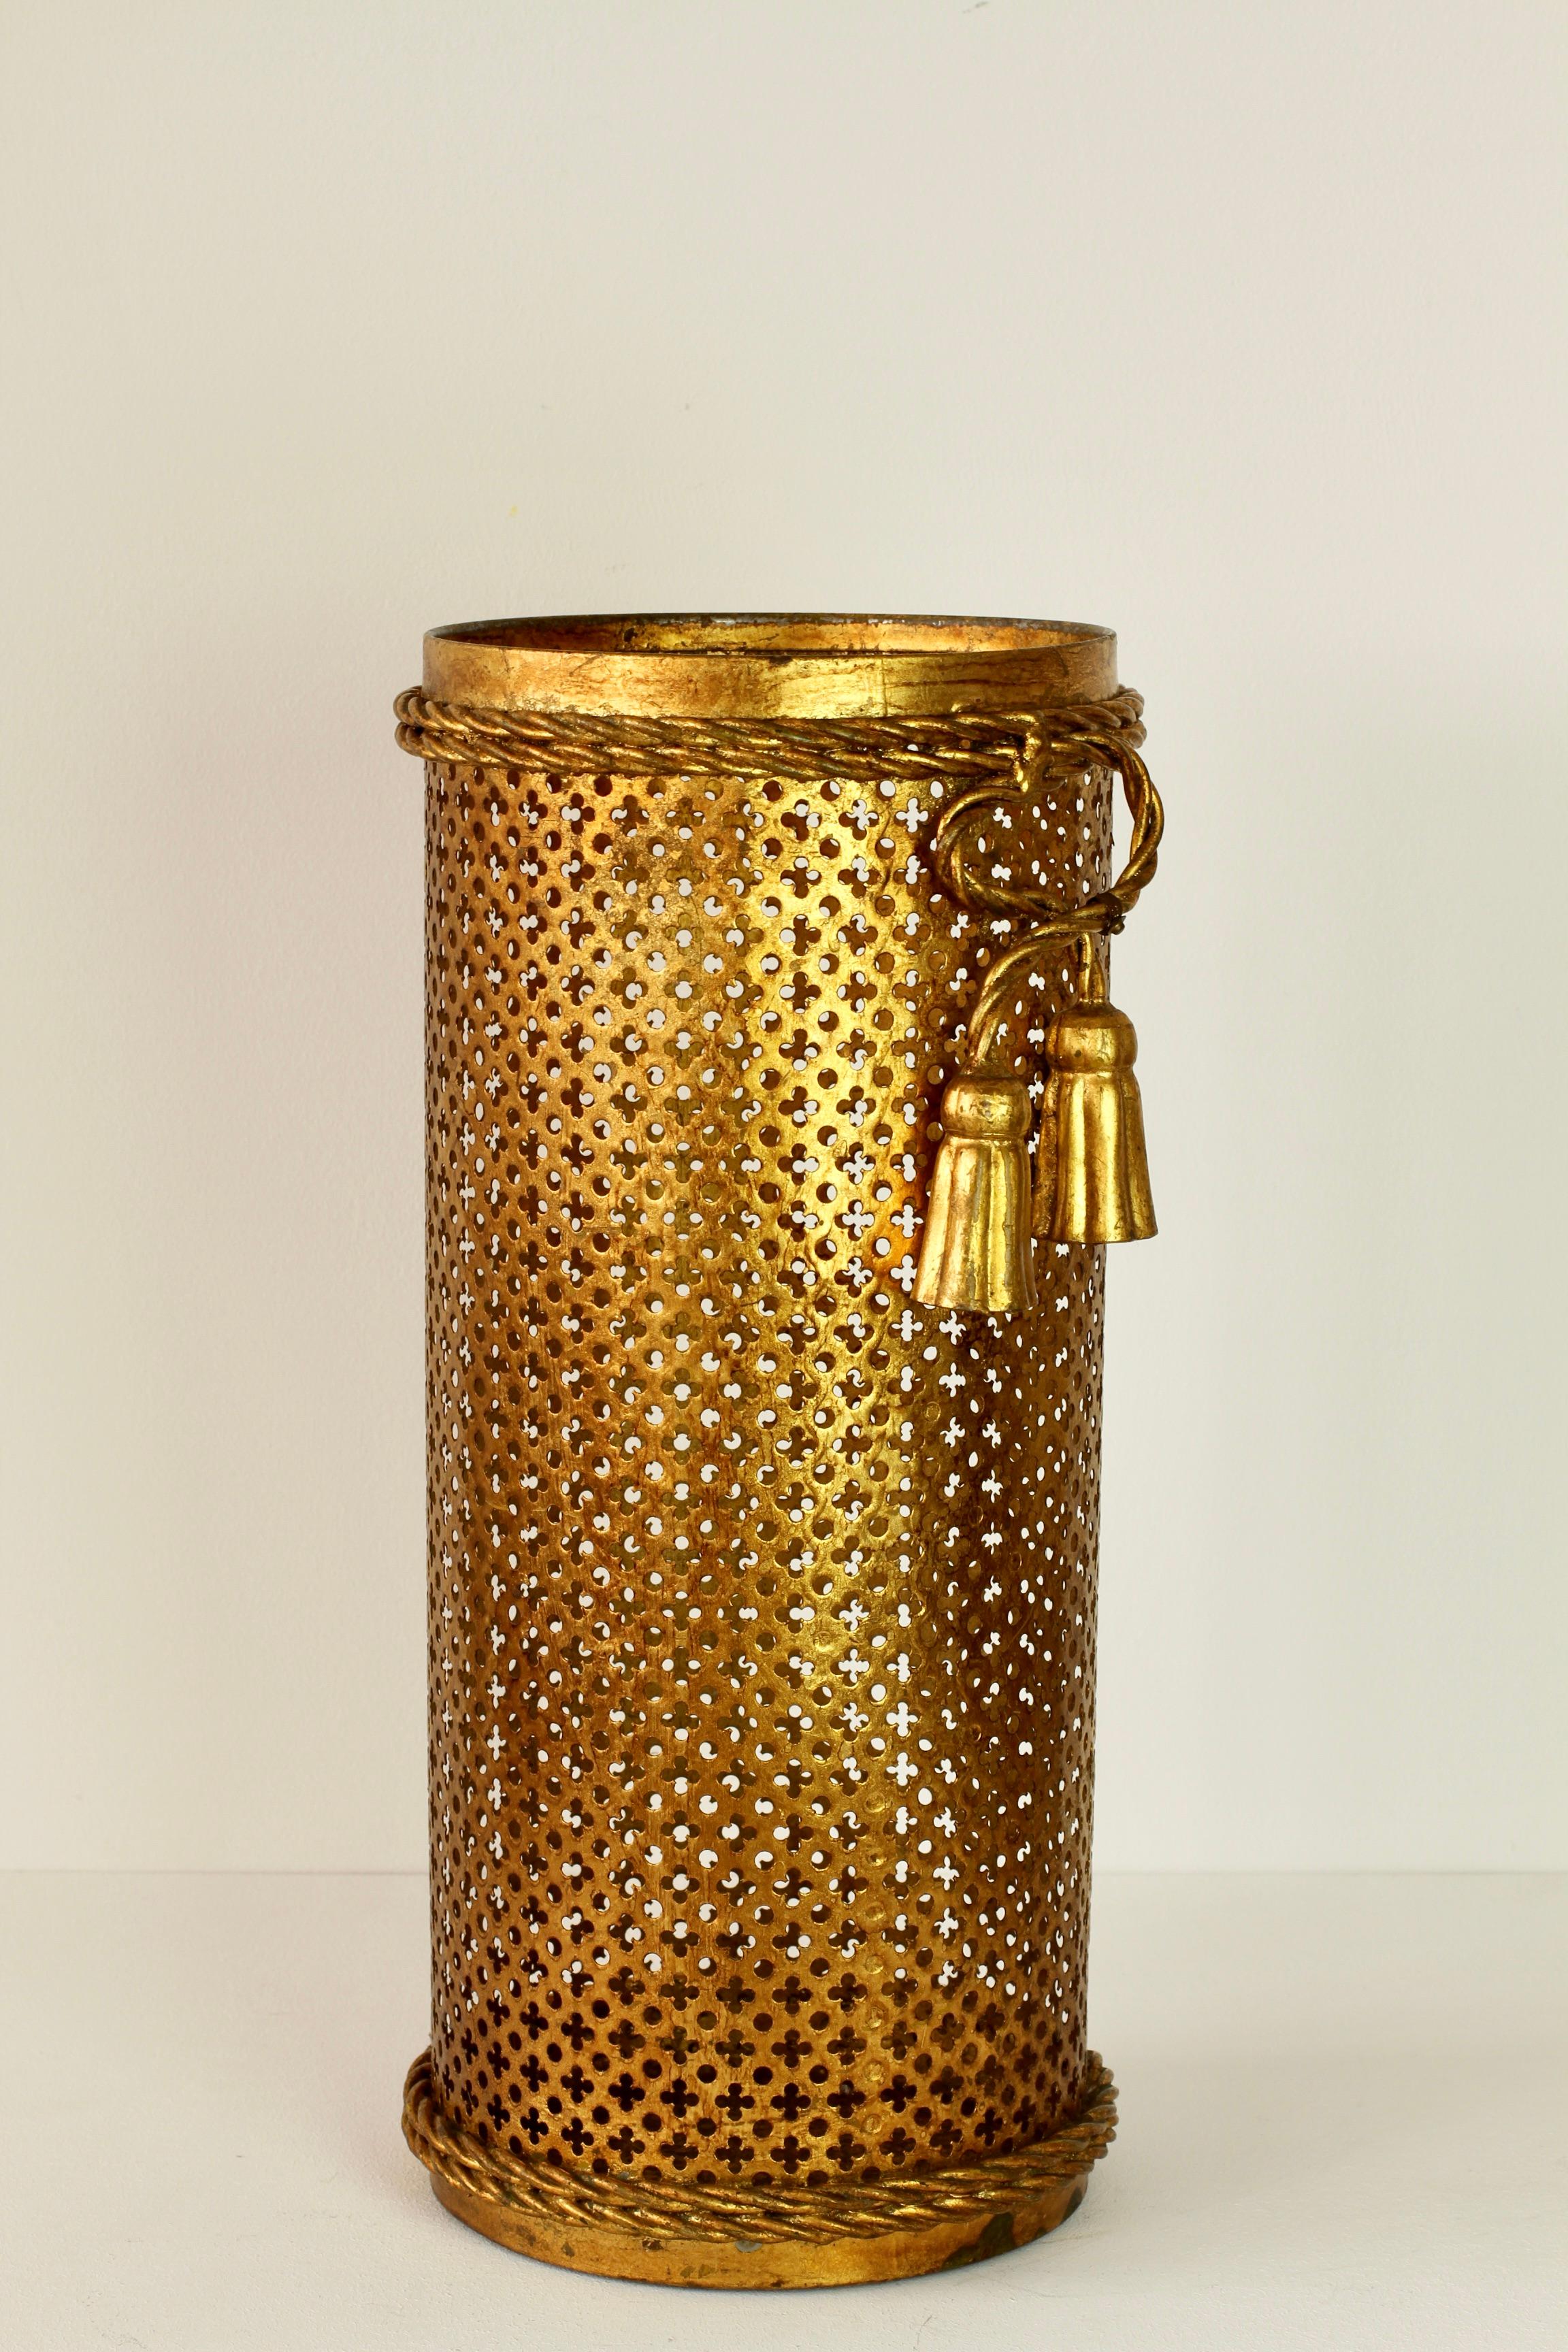 20th Century Midcentury Italian Hollywood Regency Gold Gilded Umbrella Stand or Holder, 1950s For Sale